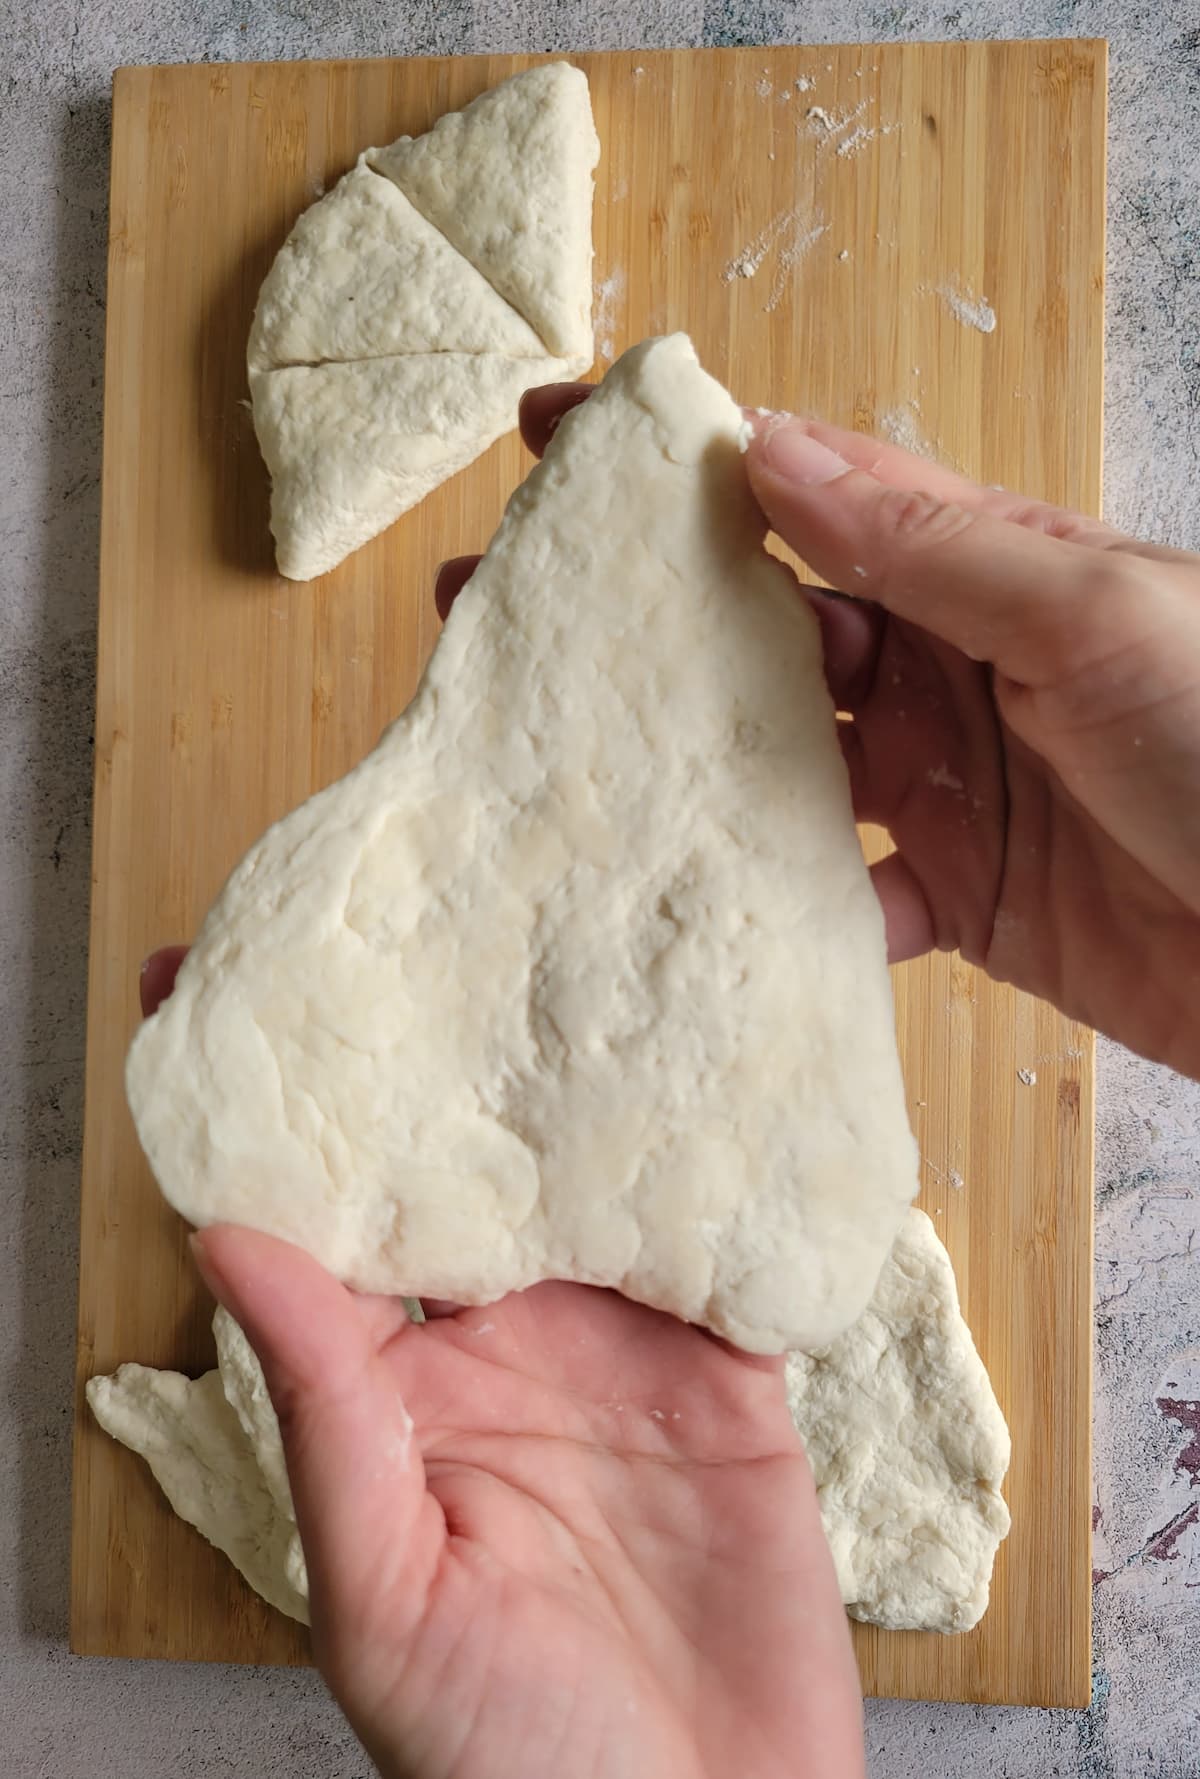 hands holding a triangular piece of dough over a cutting board with the rest of the dough pieces